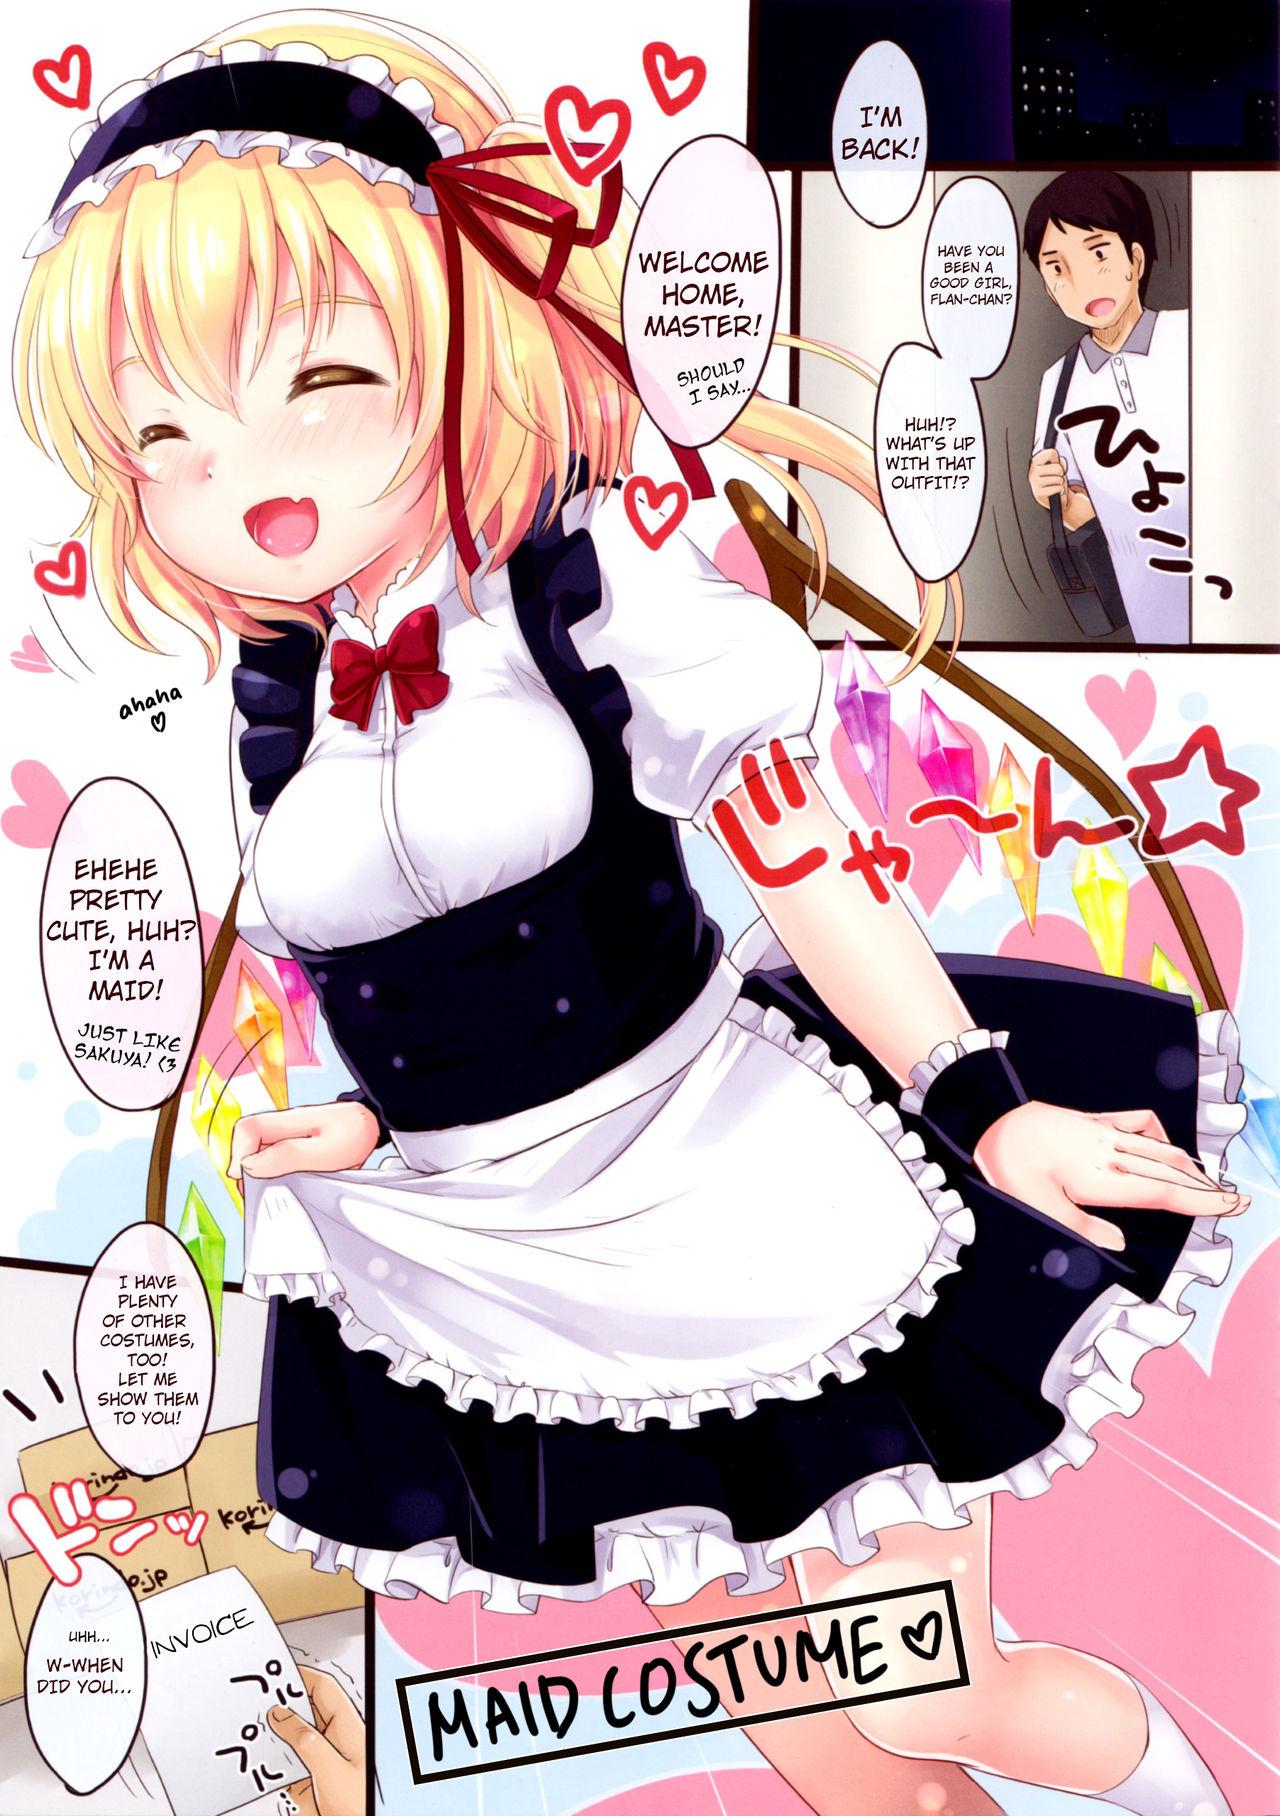 Twerking Flan-chan High! - Touhou project Monster - Page 2